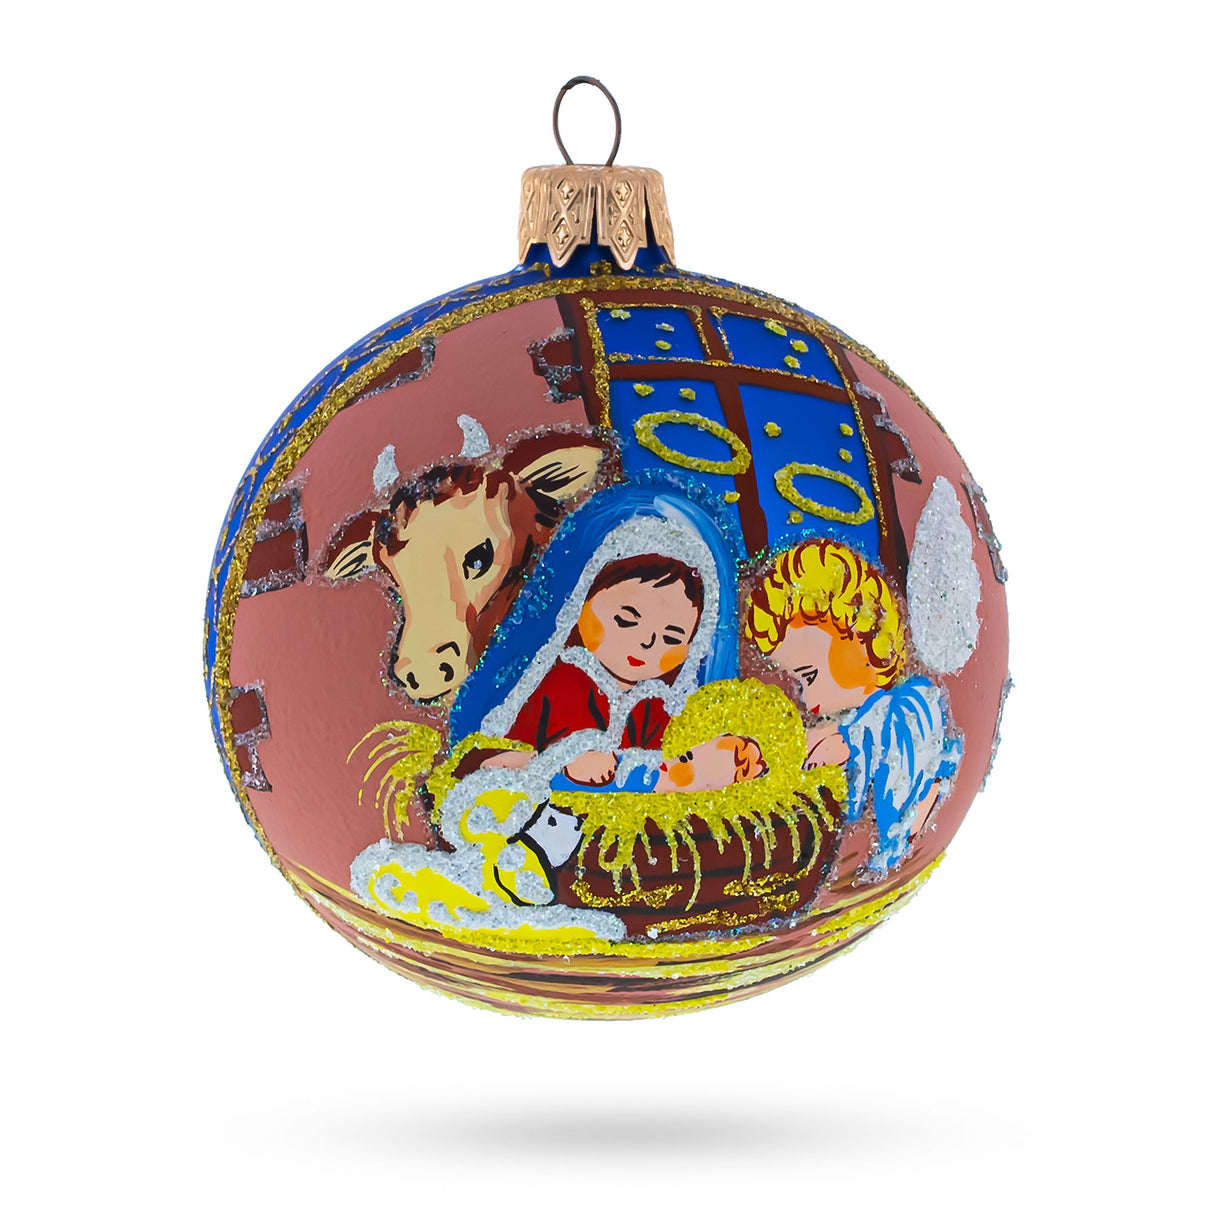 Serene Silent Night Nativity Scene- Blown Glass Ball Christmas Ornament 3.25 Inches in Blue color, Round shape